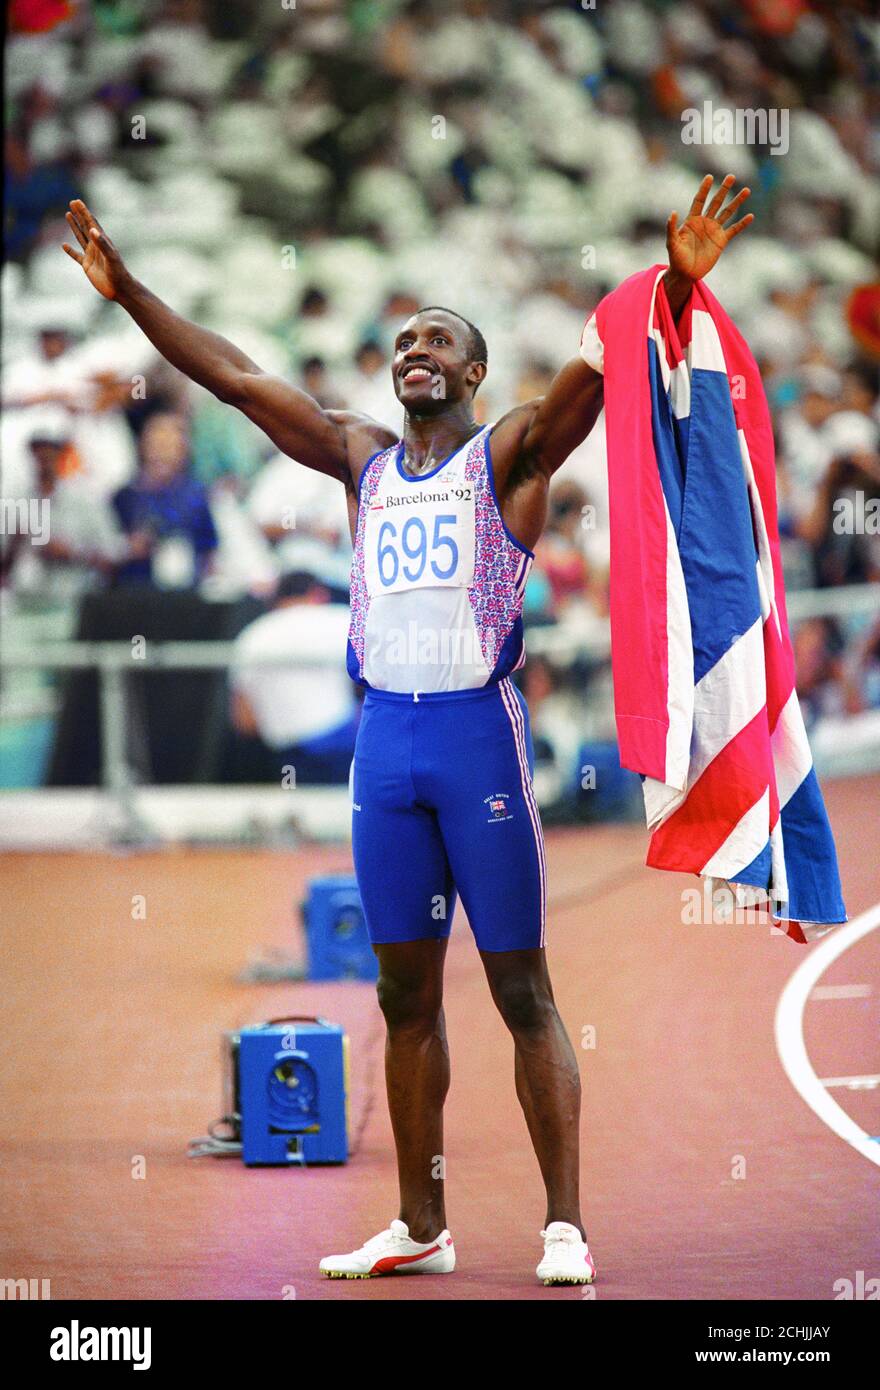 TRACK HERO, LINFORD CHRISTIE TAKES THE APPLAUSE AFTER HIS 100M OLYMPIC TITLE VICTORY IN BARCELONA.  Stock Photo